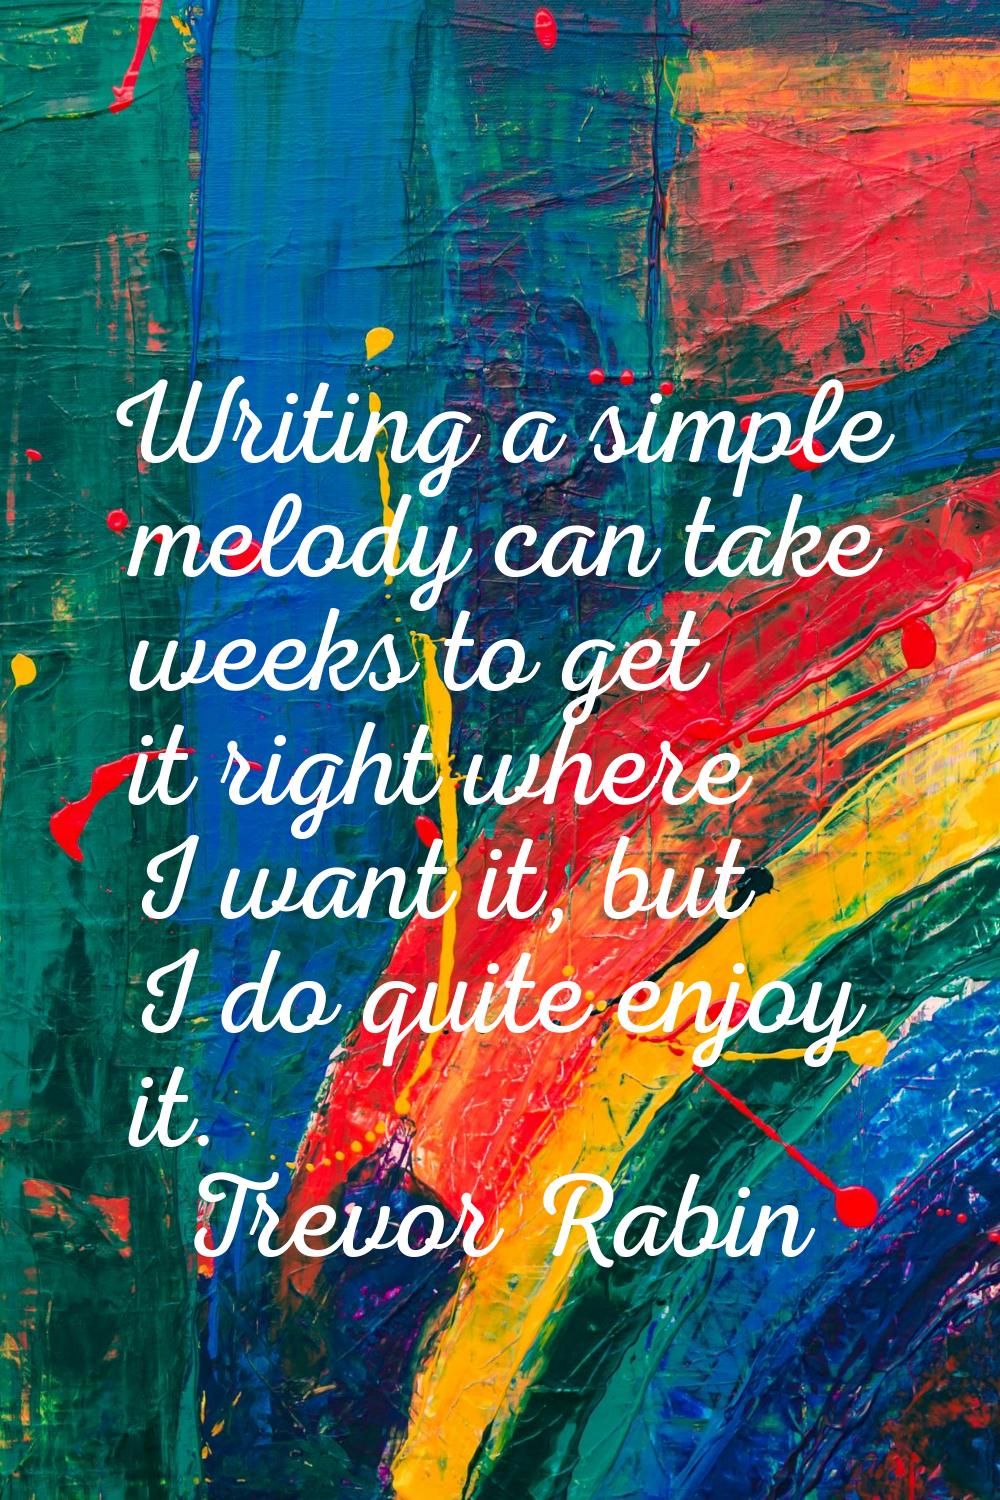 Writing a simple melody can take weeks to get it right where I want it, but I do quite enjoy it.